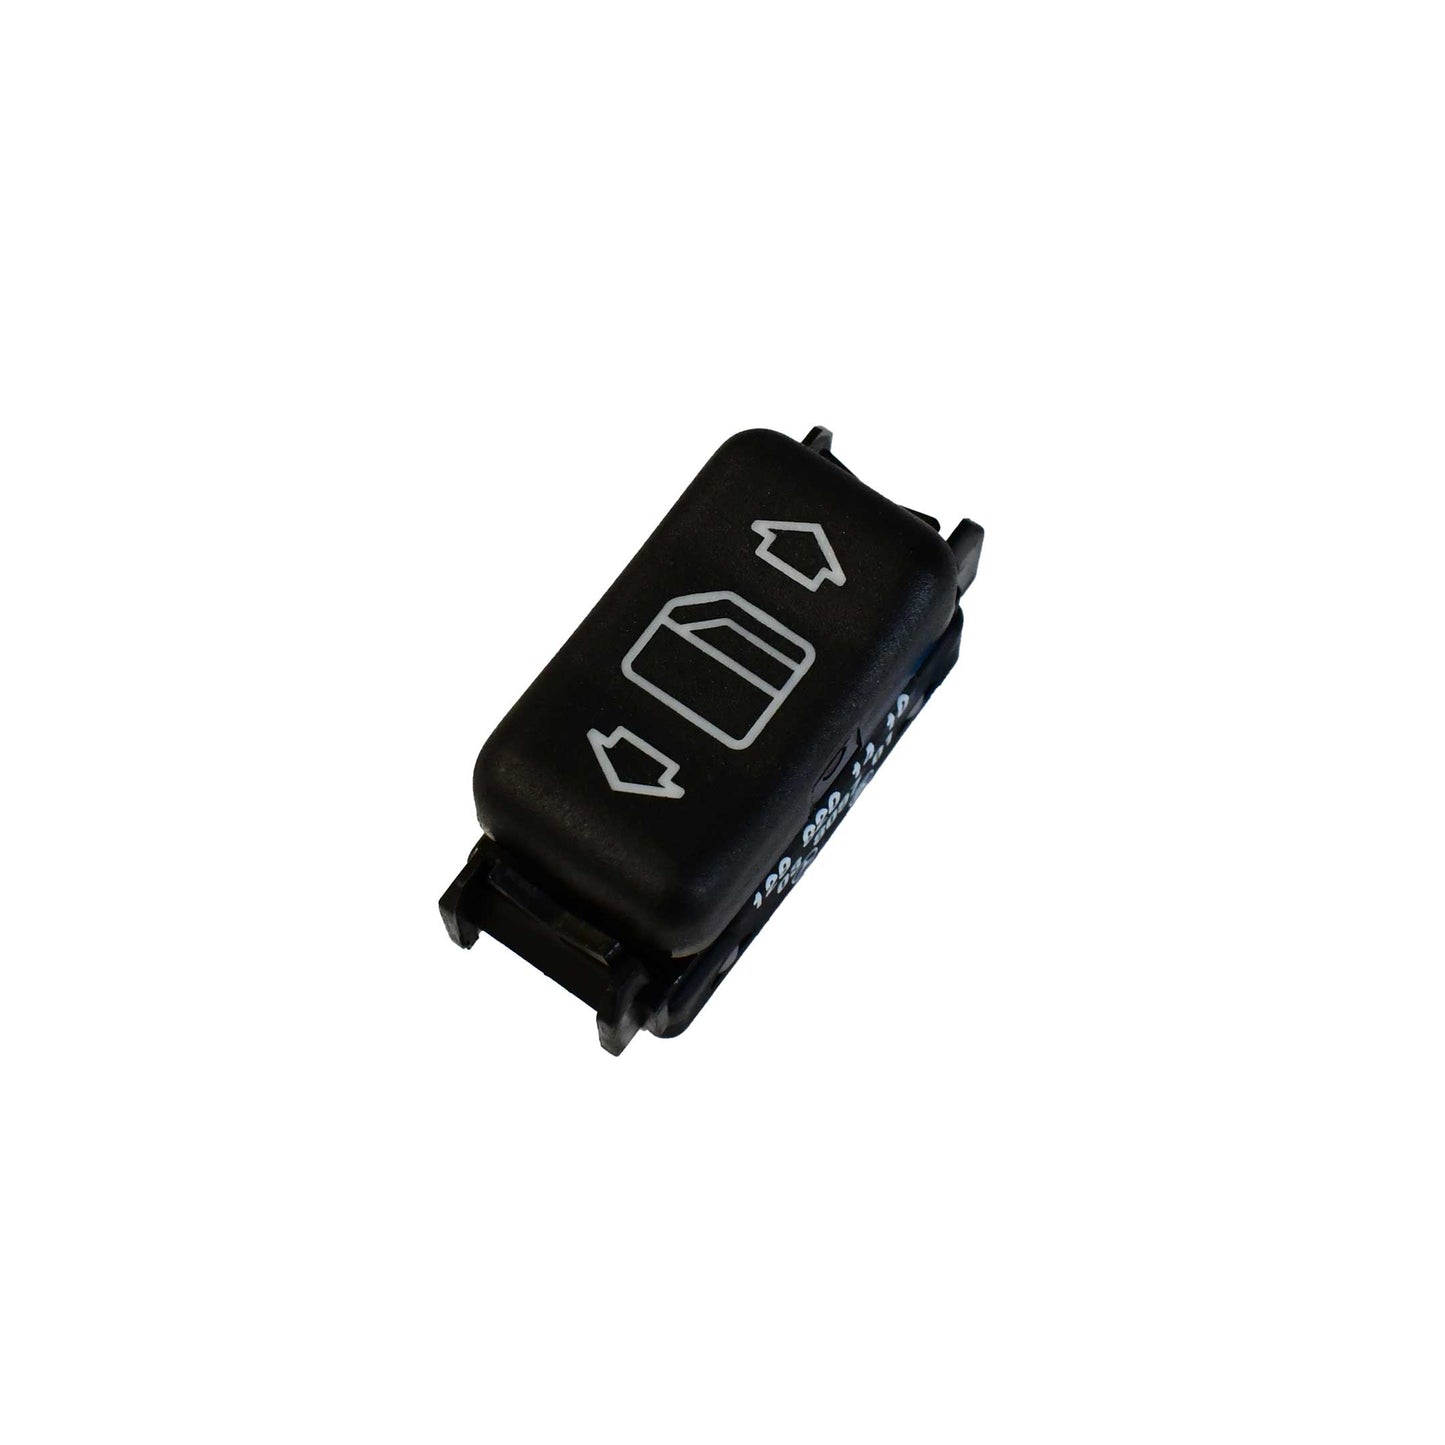 Classic Trim Parts - Power Window Switch Genuine Mercedes - R129 and A124 Models - Mercedes-Benz